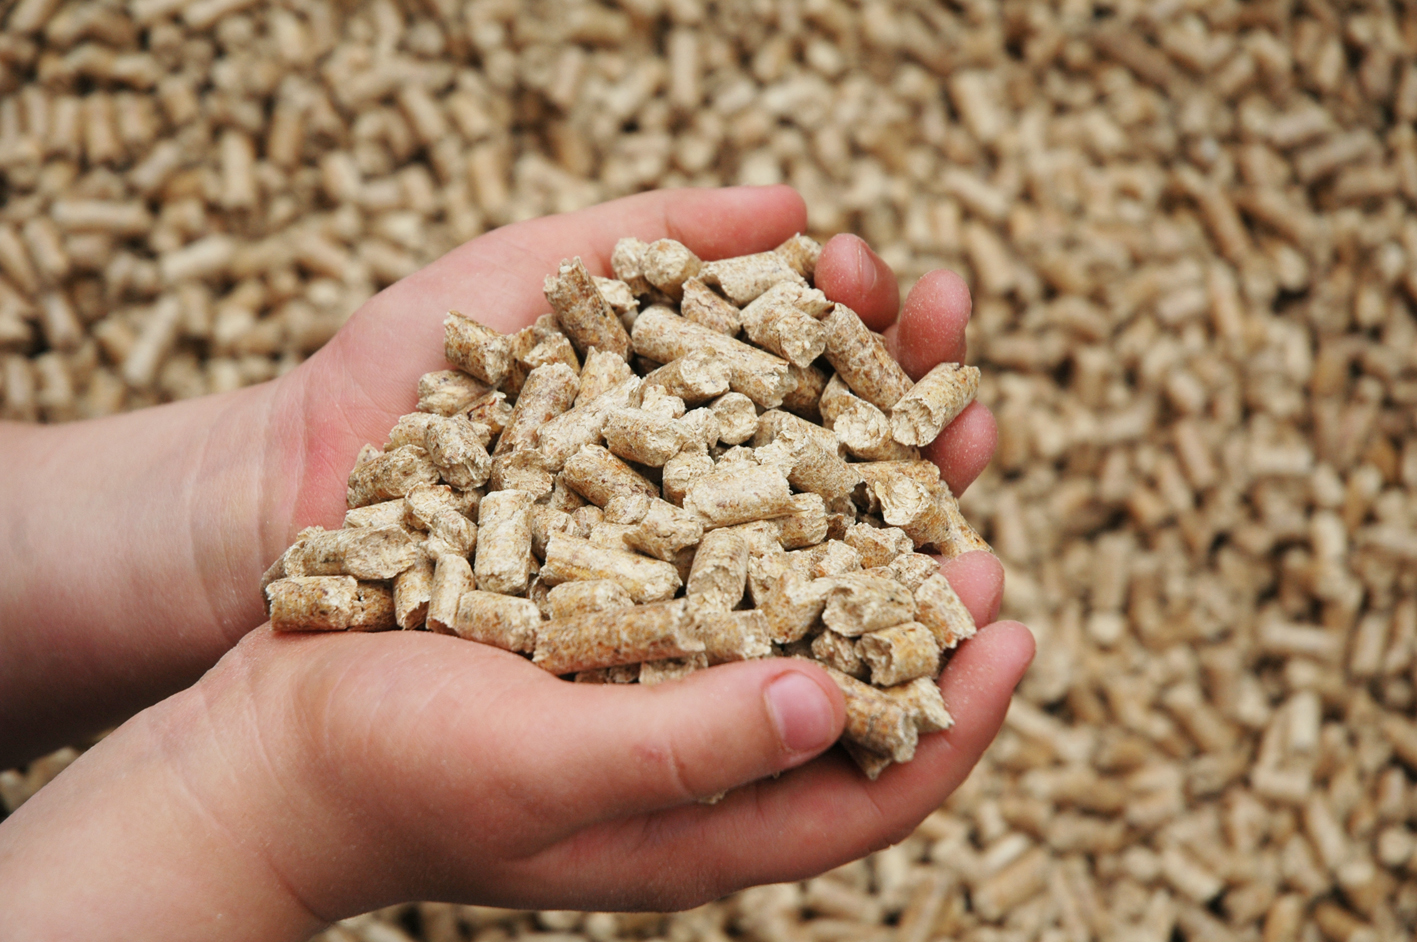 Plant-based Compound Feed Market Overview Analysis, Trends, & Future Forecast to 2032